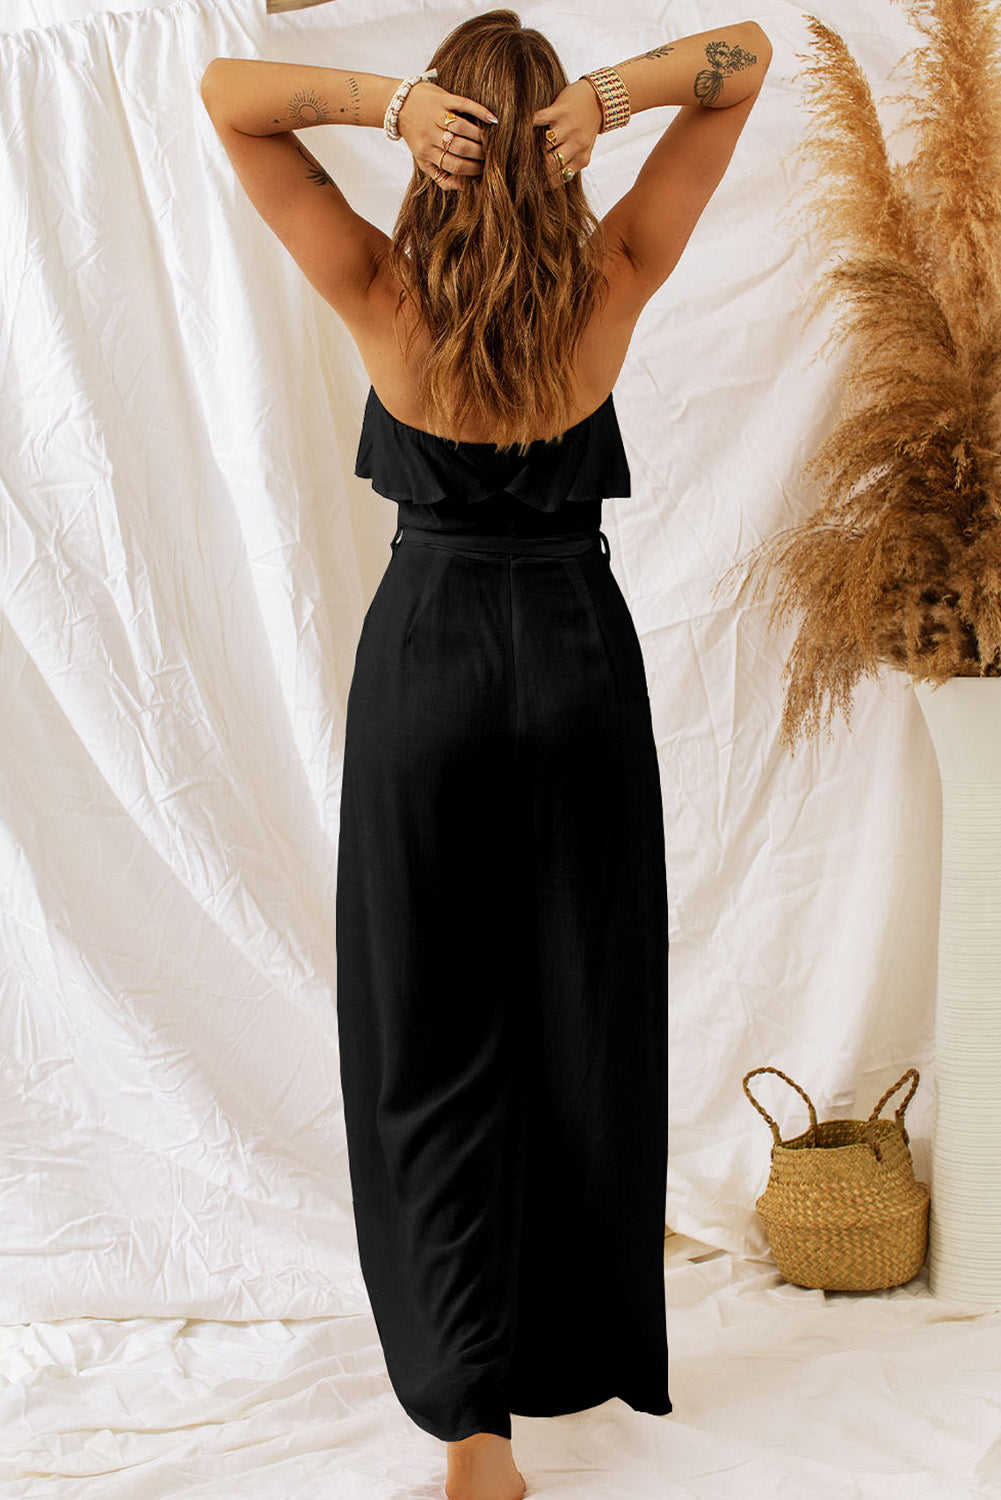 Elevate your style with our Tie-Waist Ruffled Strapless Jumpsuit. Flattering fit, chic design, perfect for any occasion. Available in white and black